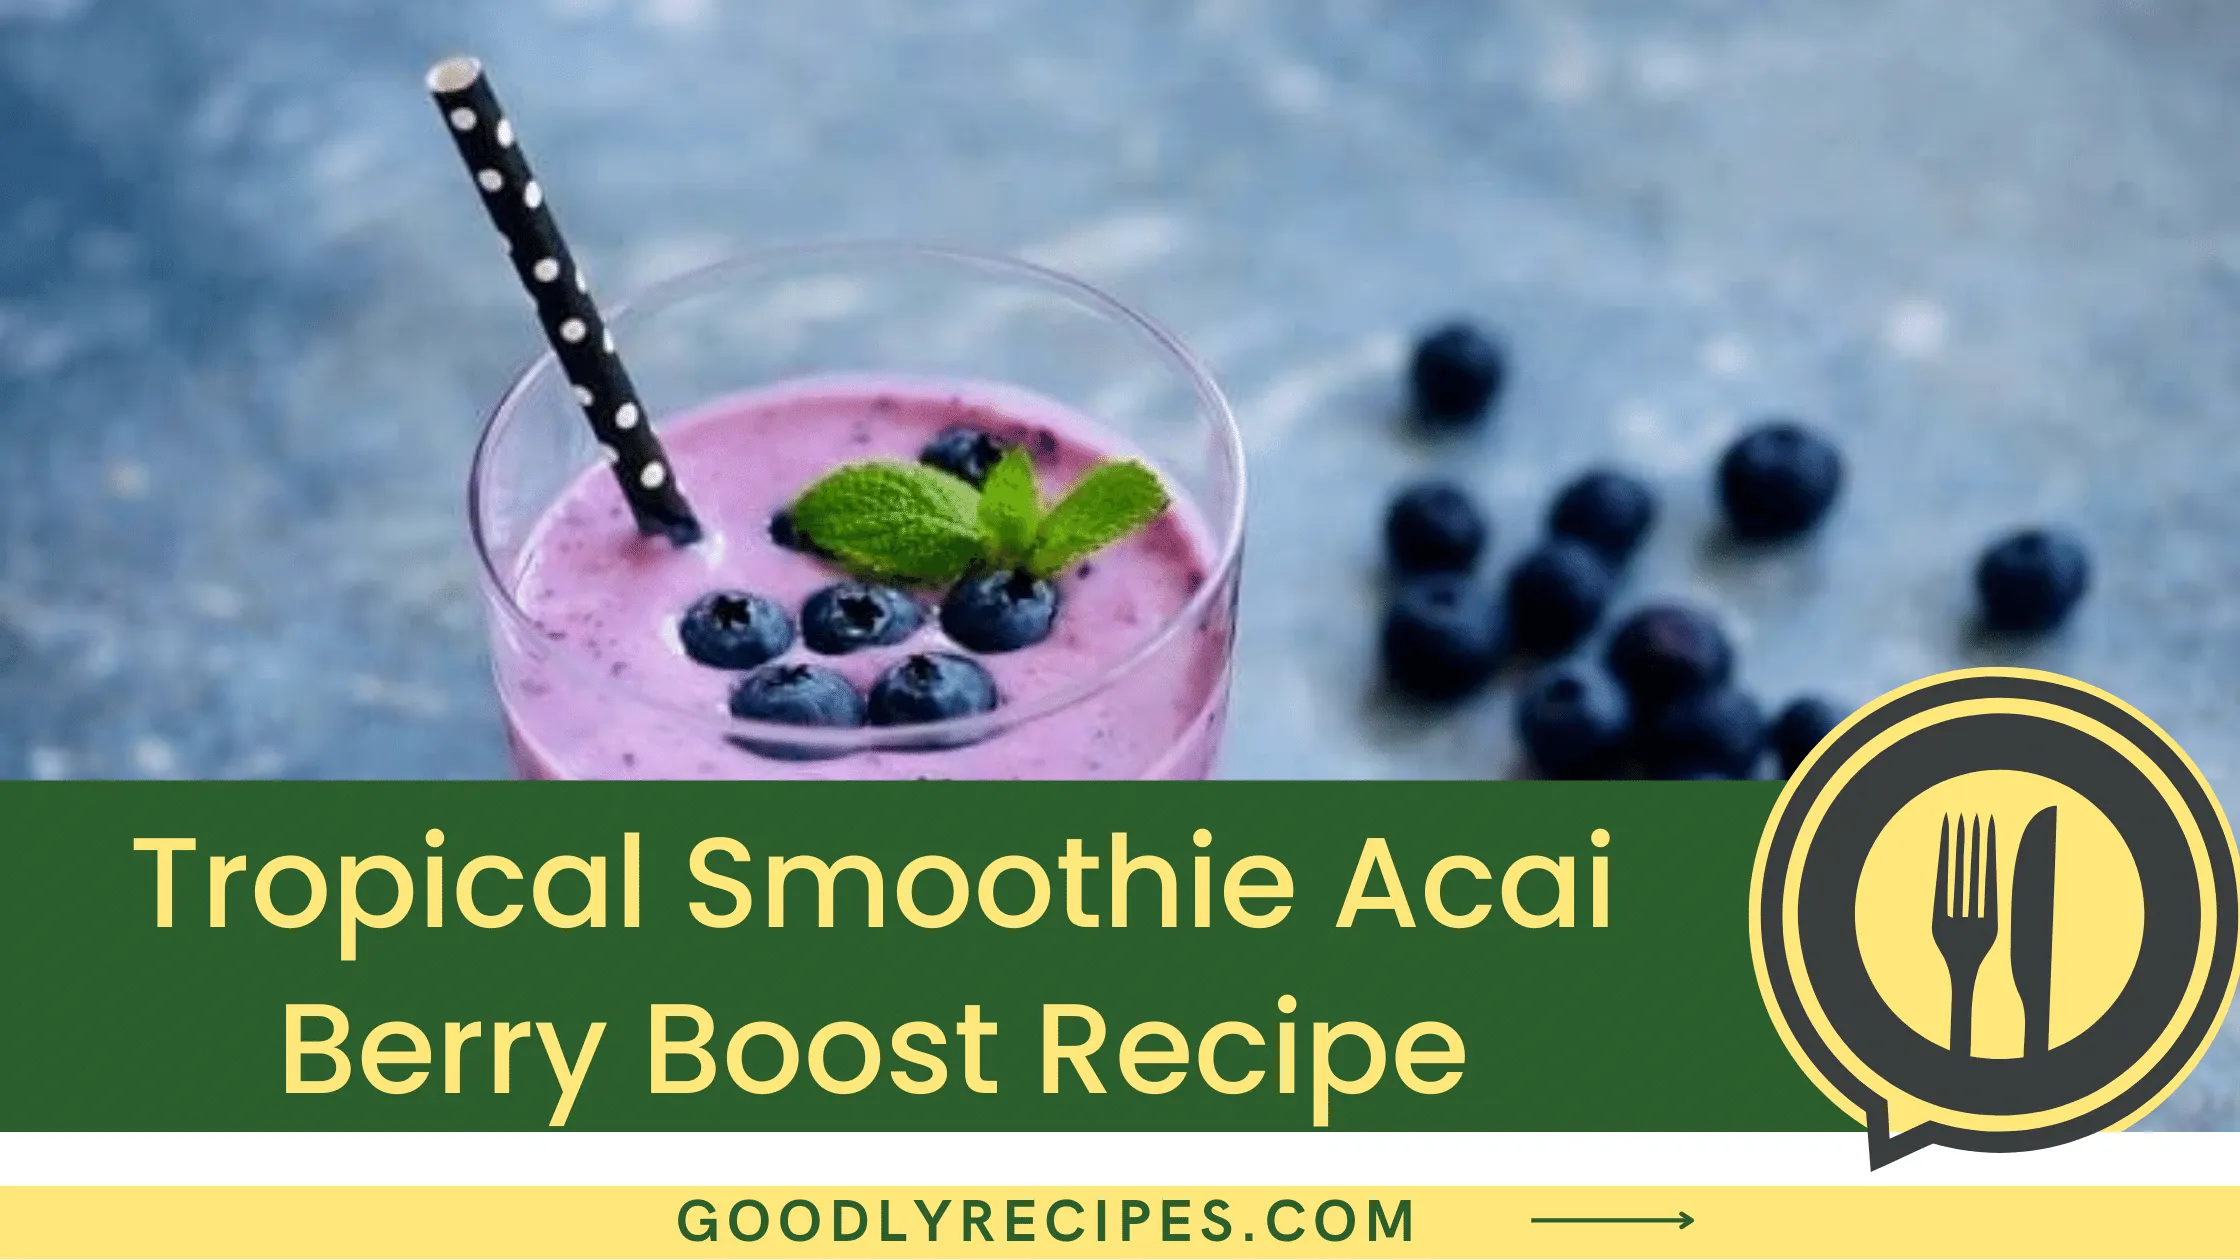 What is Tropical Smoothie Acai Berry Boost Recipe?